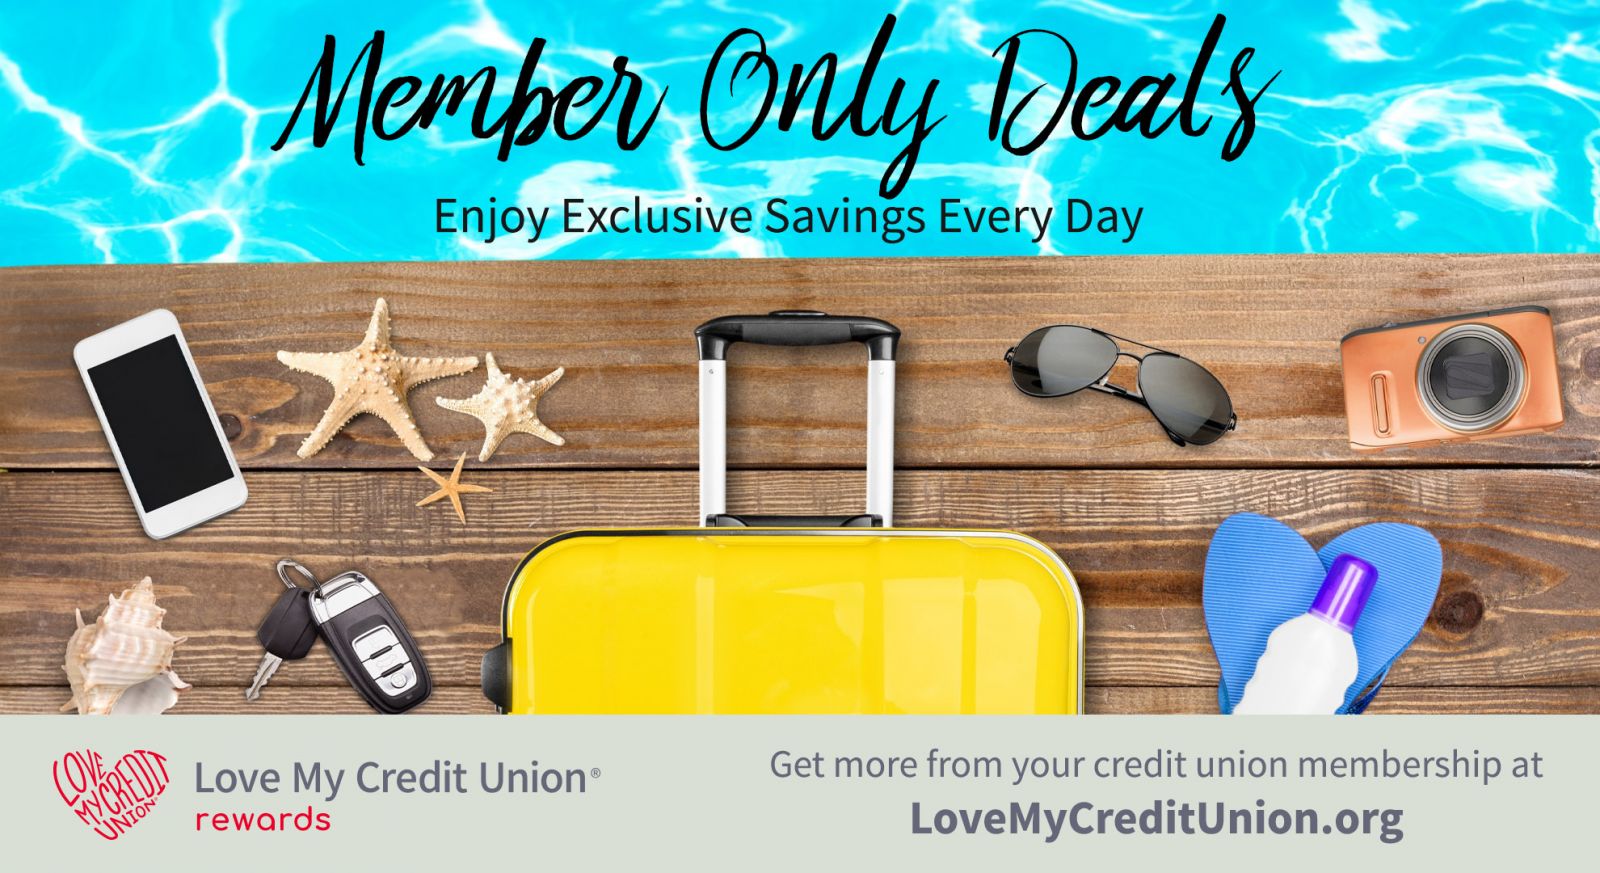 member only deals by canopy cu. enjoy exclusive savings every day.